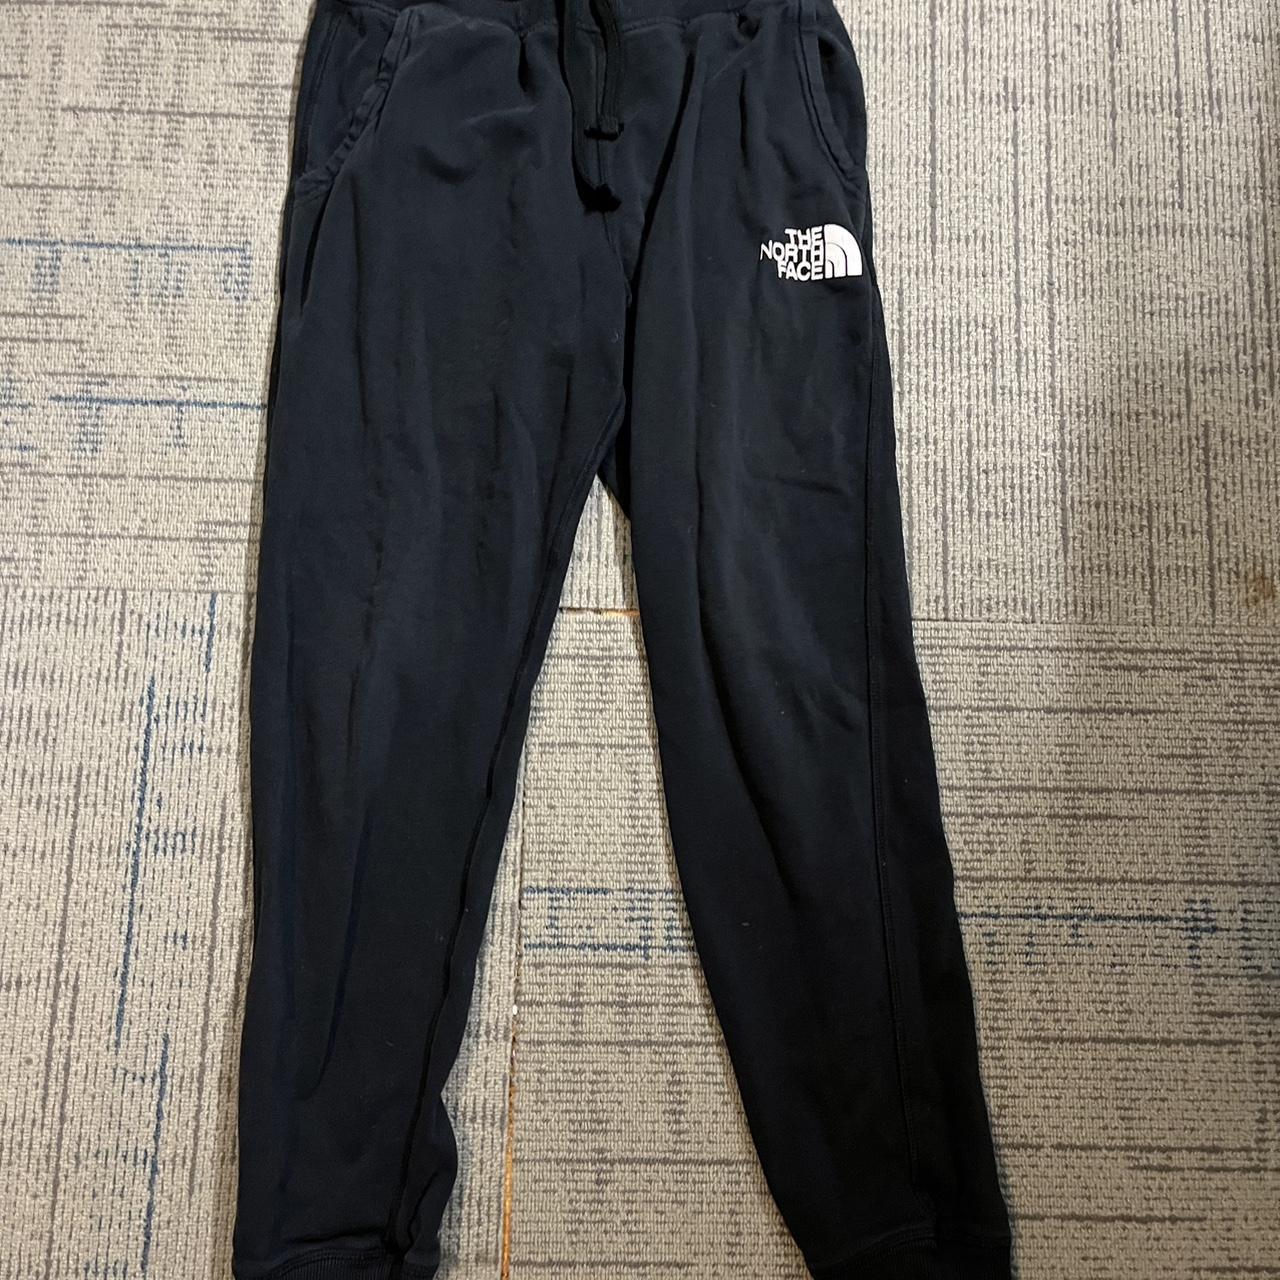 The North Face Men's Black and White Trousers